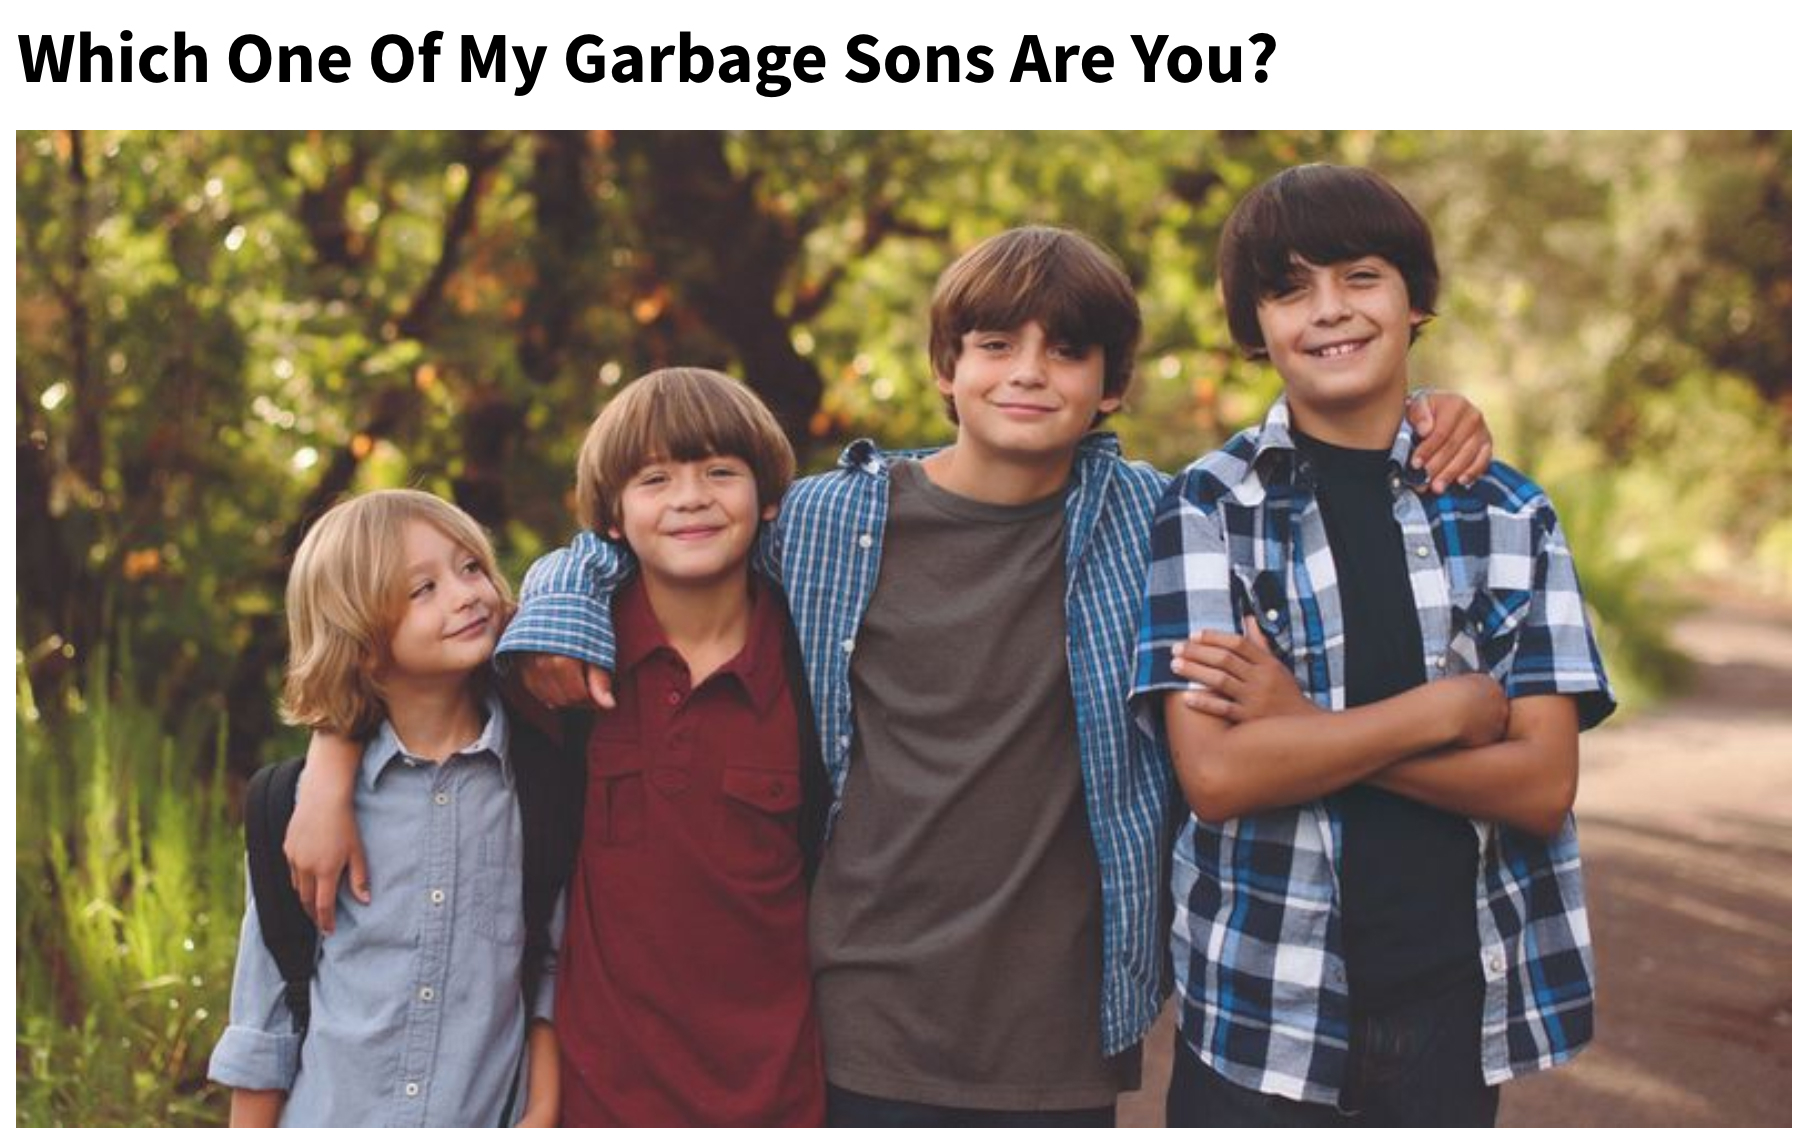 clickhole headlines - Which One Of My Garbage Sons Are You?